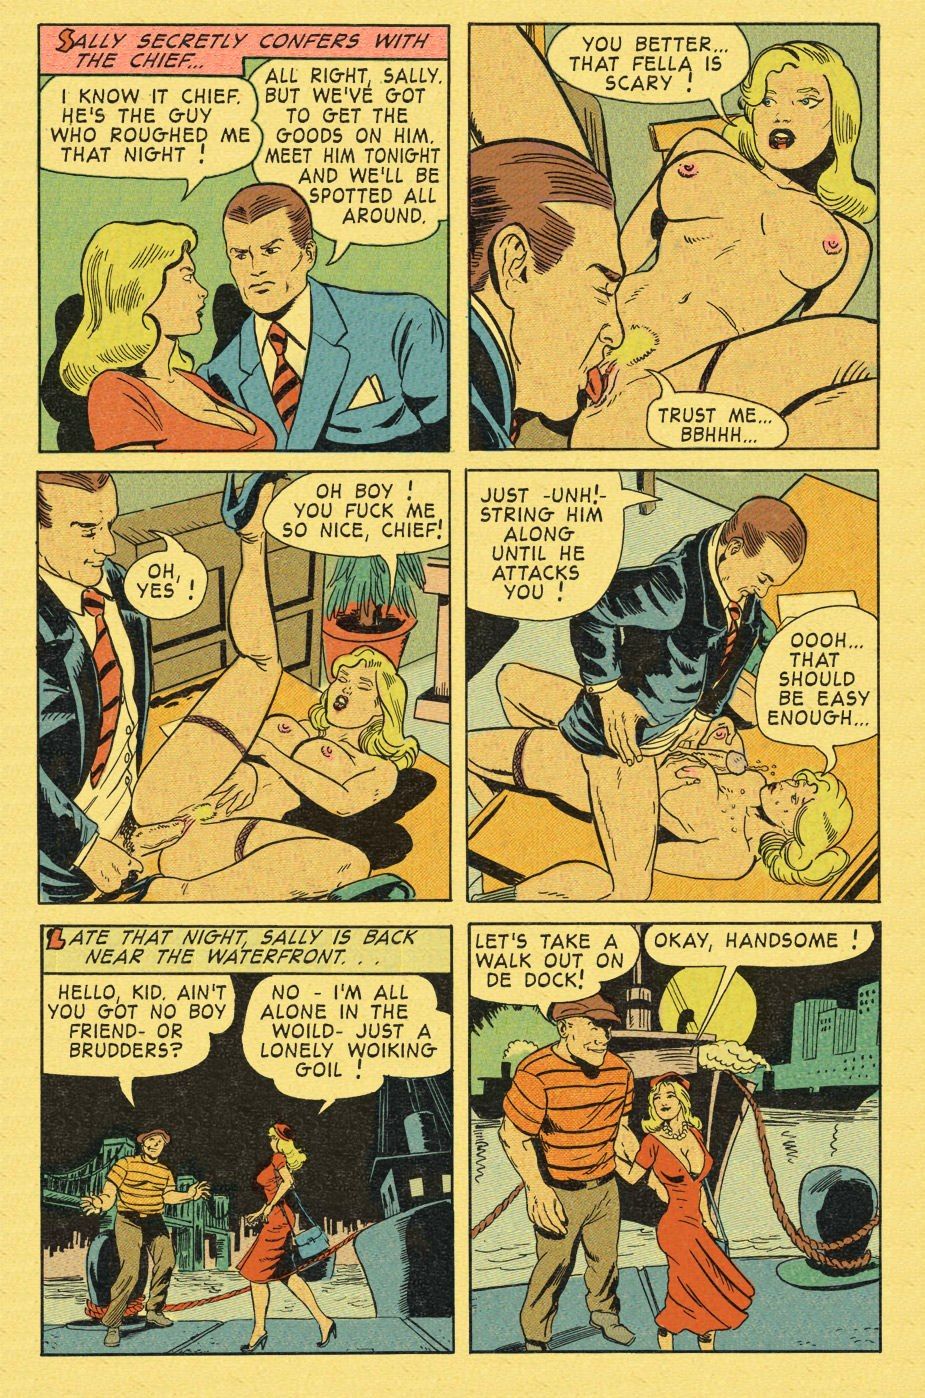 Crime Smashers Part 1 The Wertham Files page 7